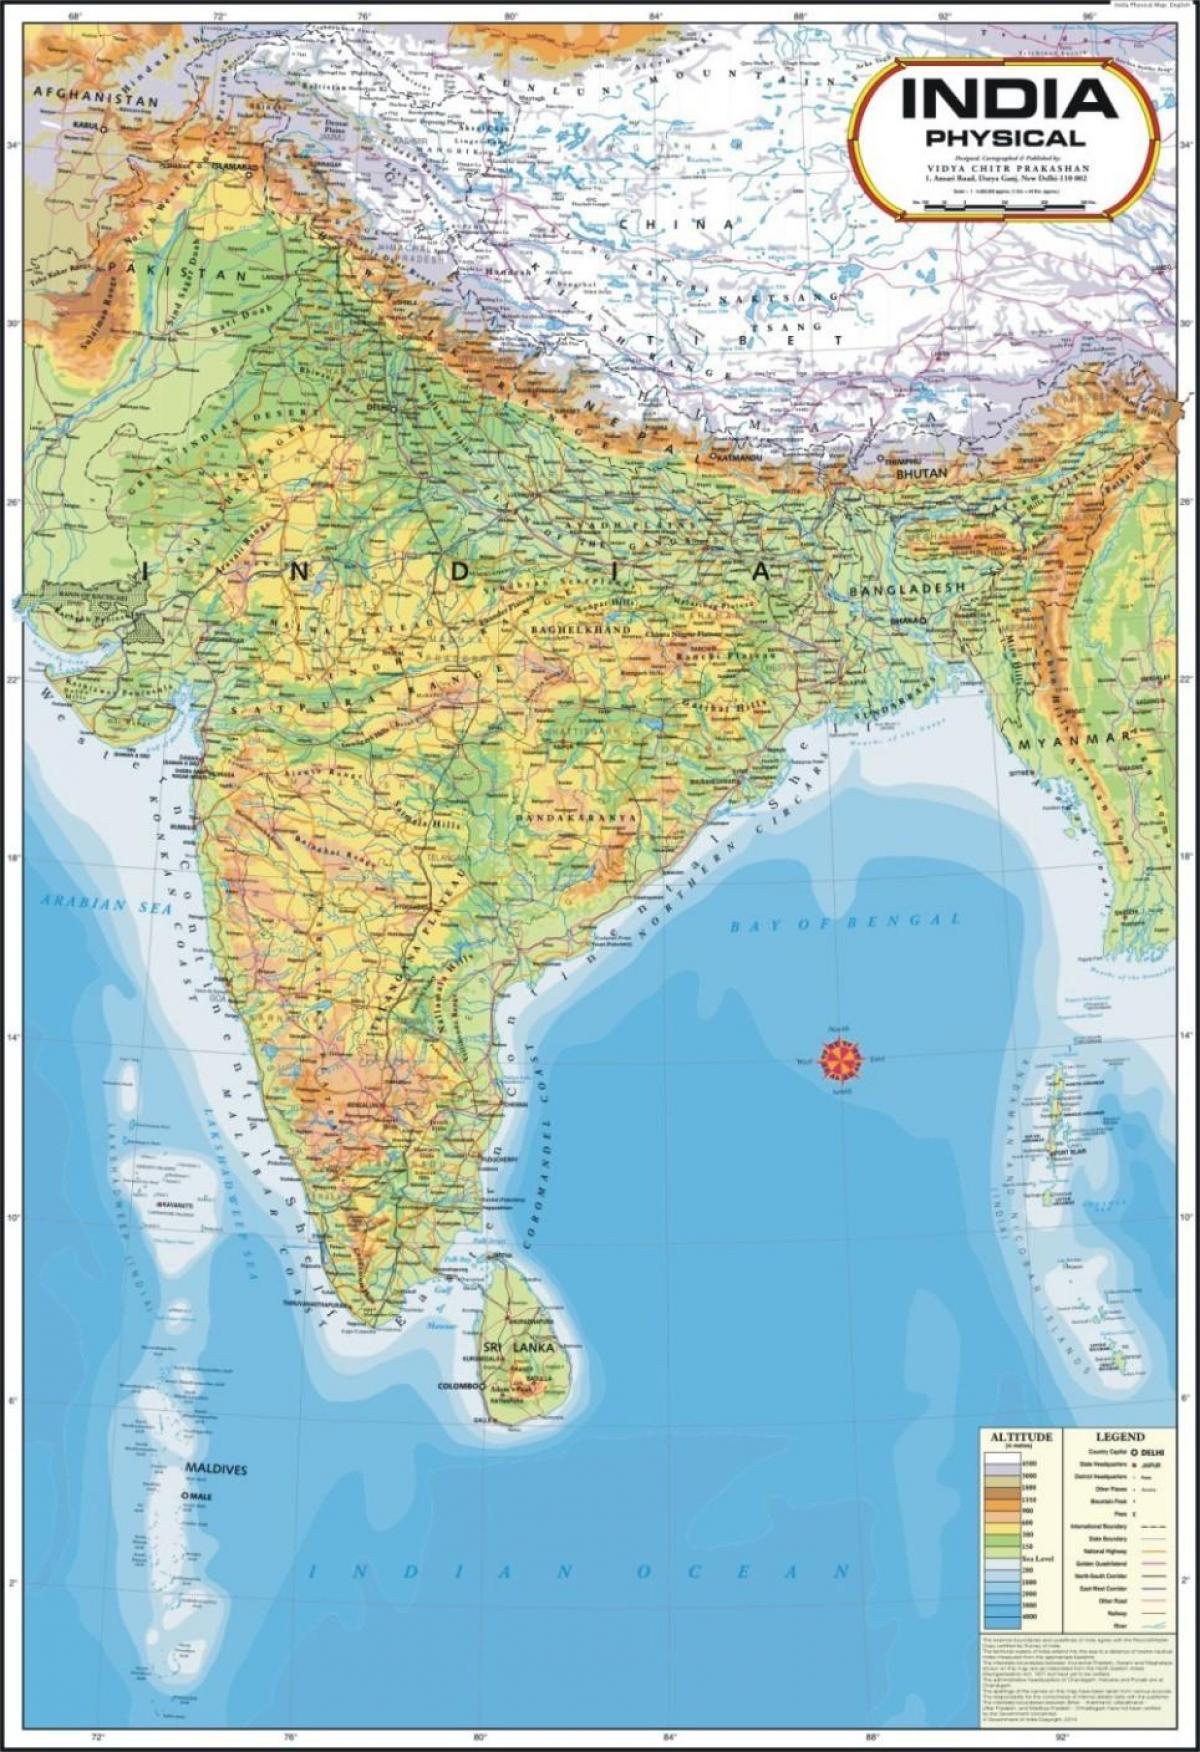 India physical map